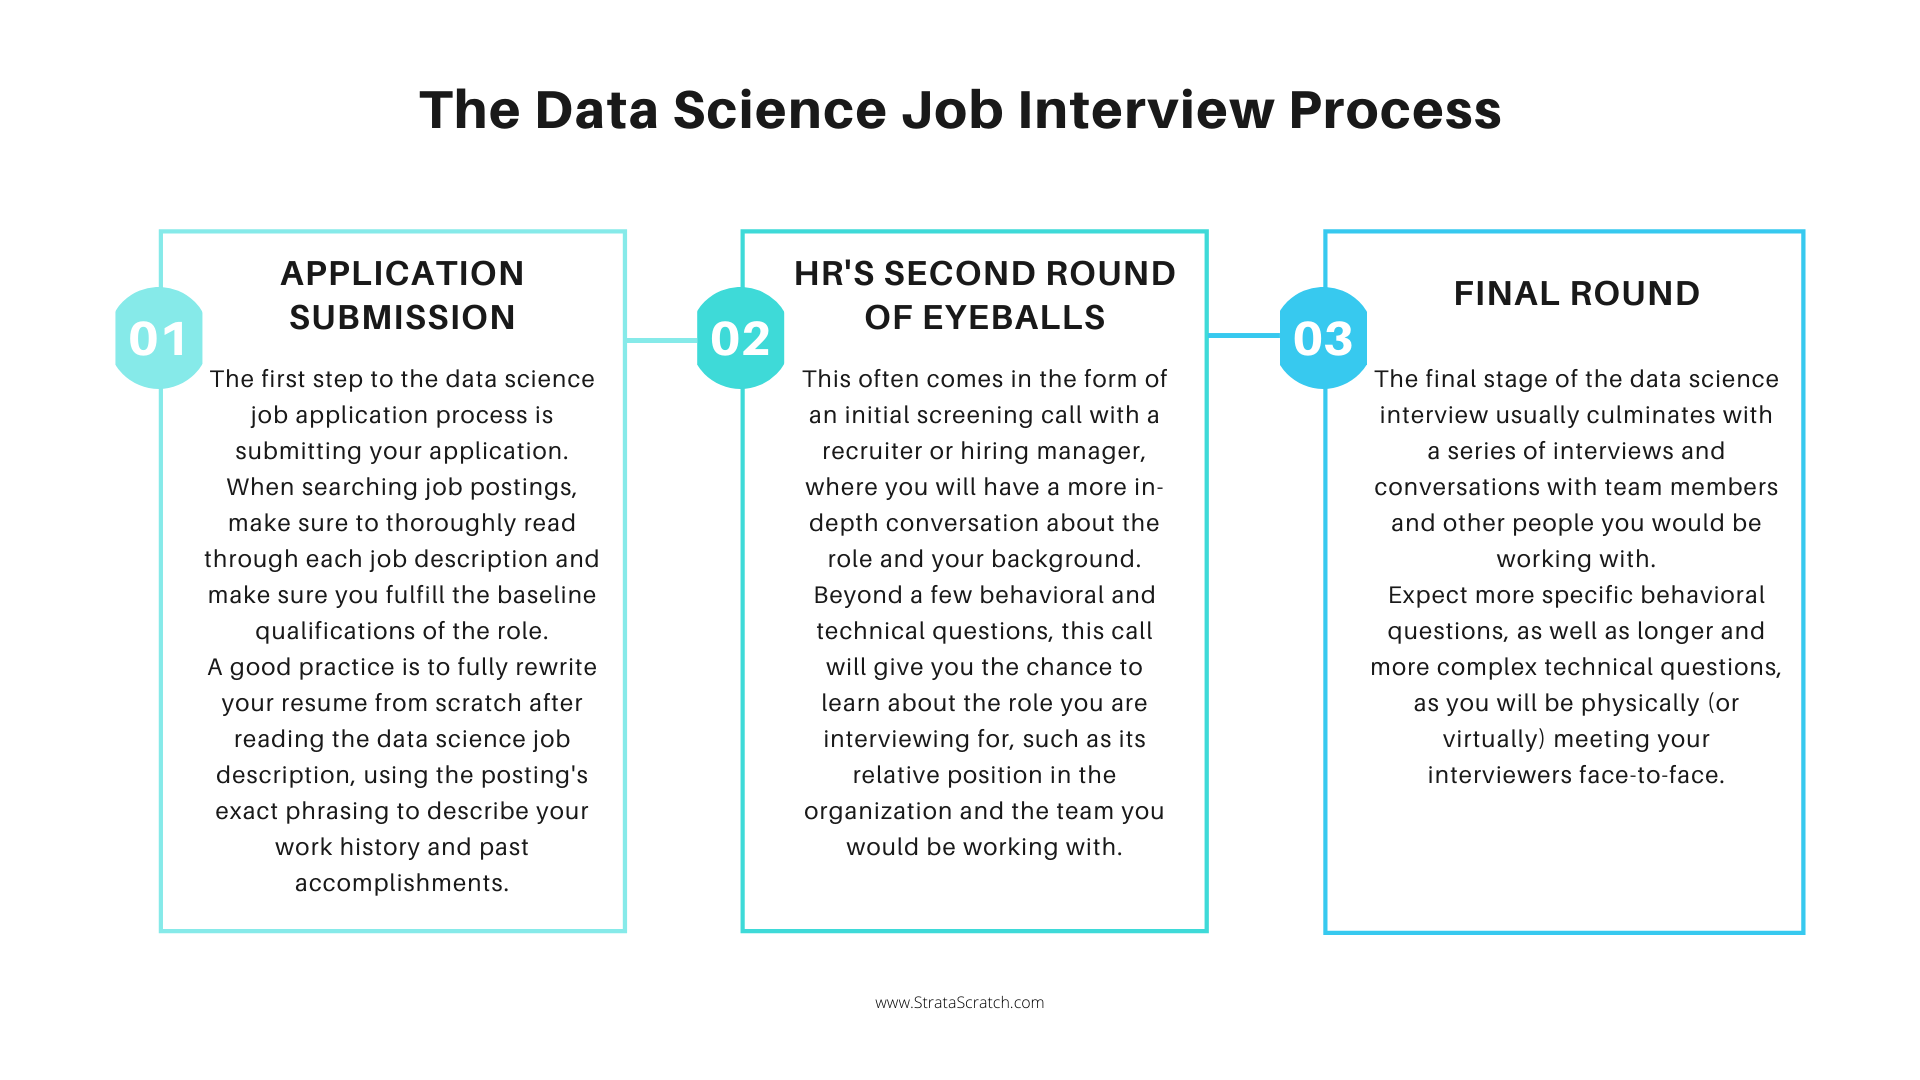 The Data Science Job Interview Process